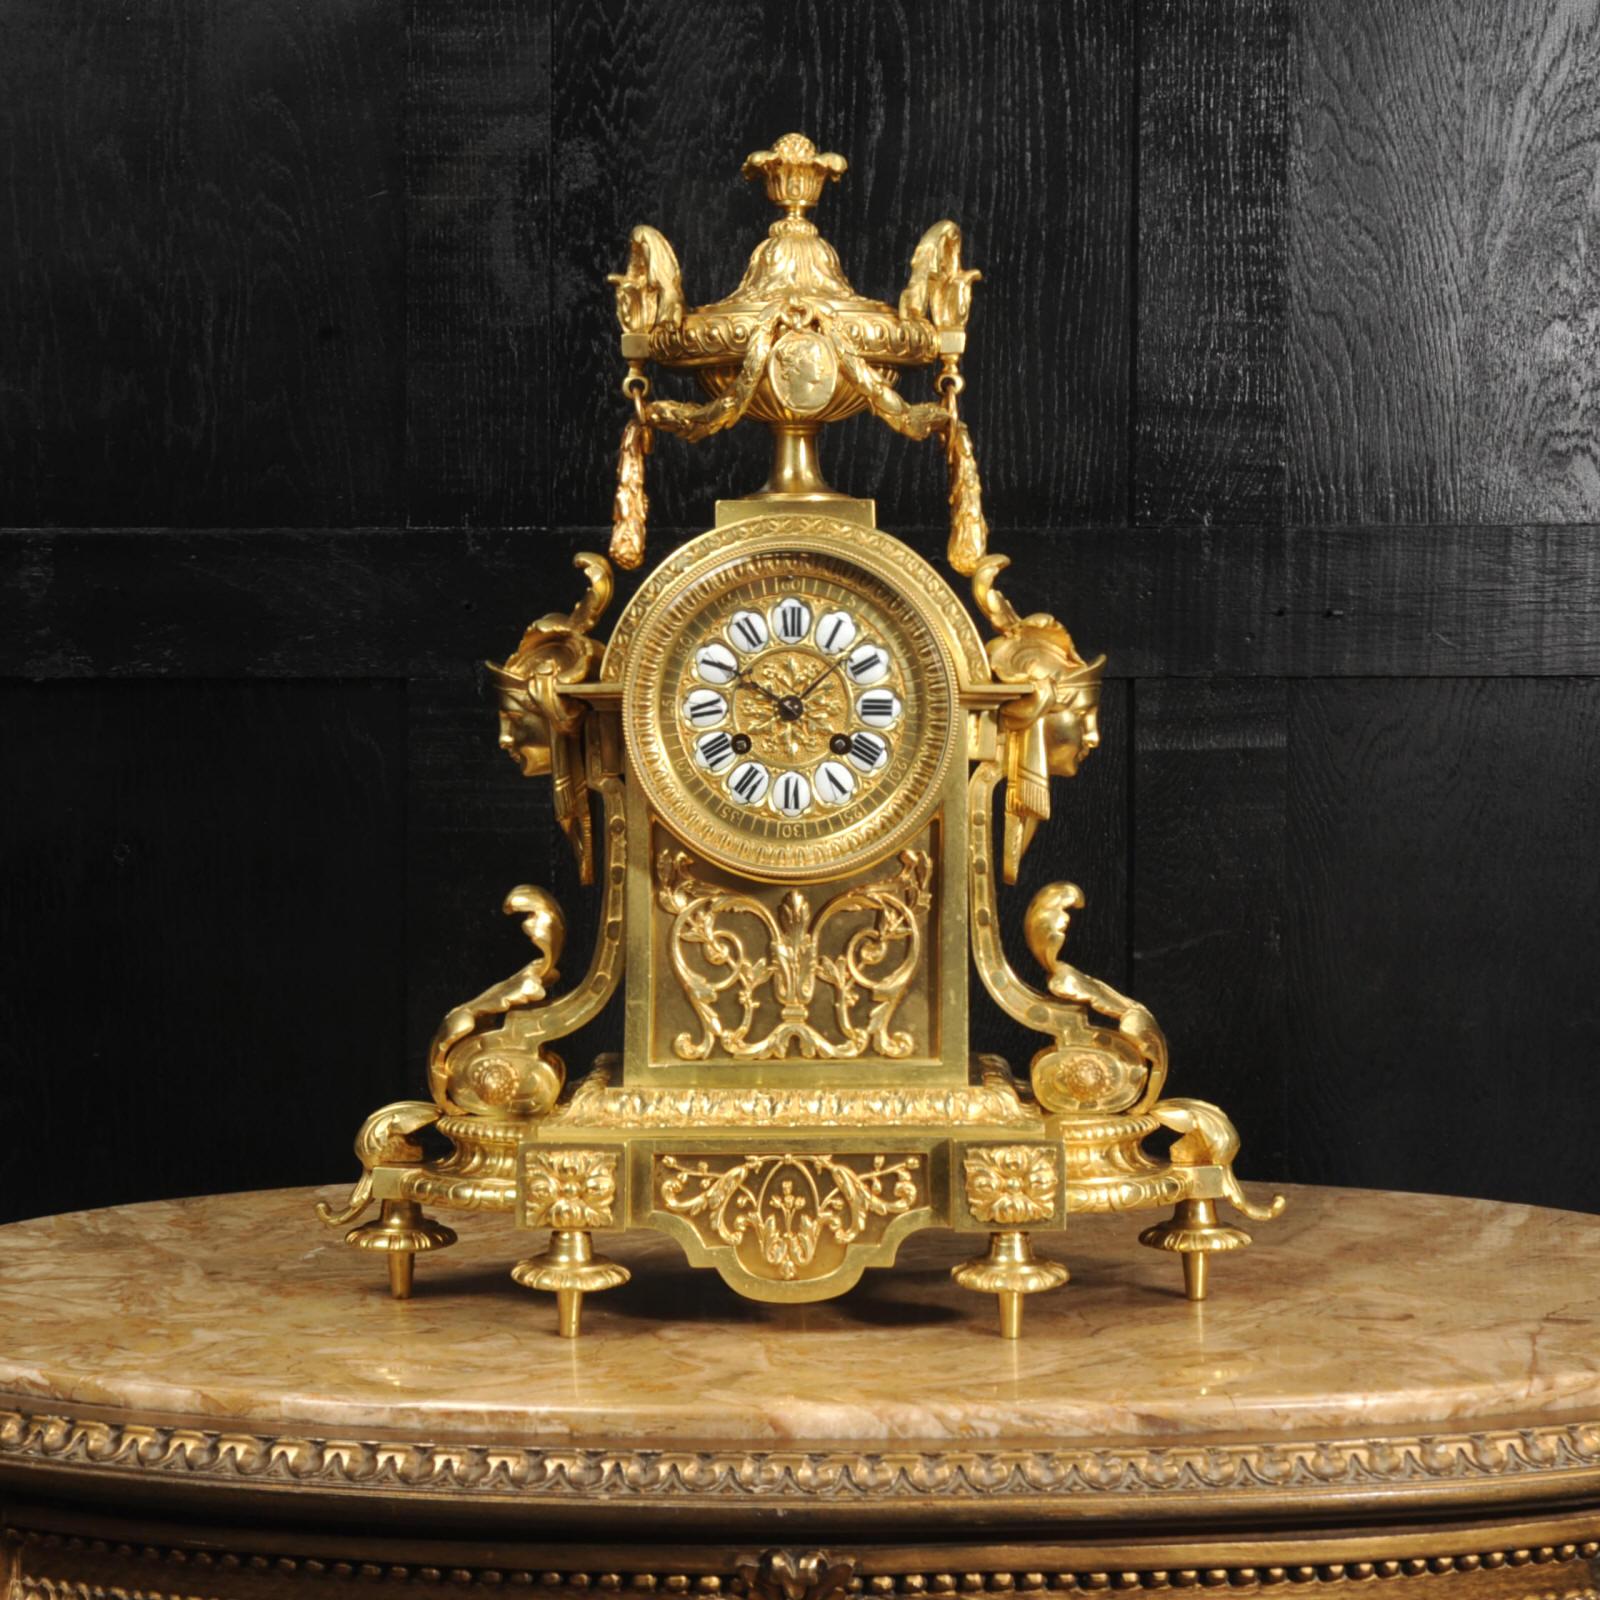 A large and heavy original antique French gilt-bronze clock, circa 1890. It is a beautifully made clock in the Neoclassical style of Louis XVI by G. Philippe, of the prestigious Gallery Montpensier of the Palais Royal. Of architectural form with two